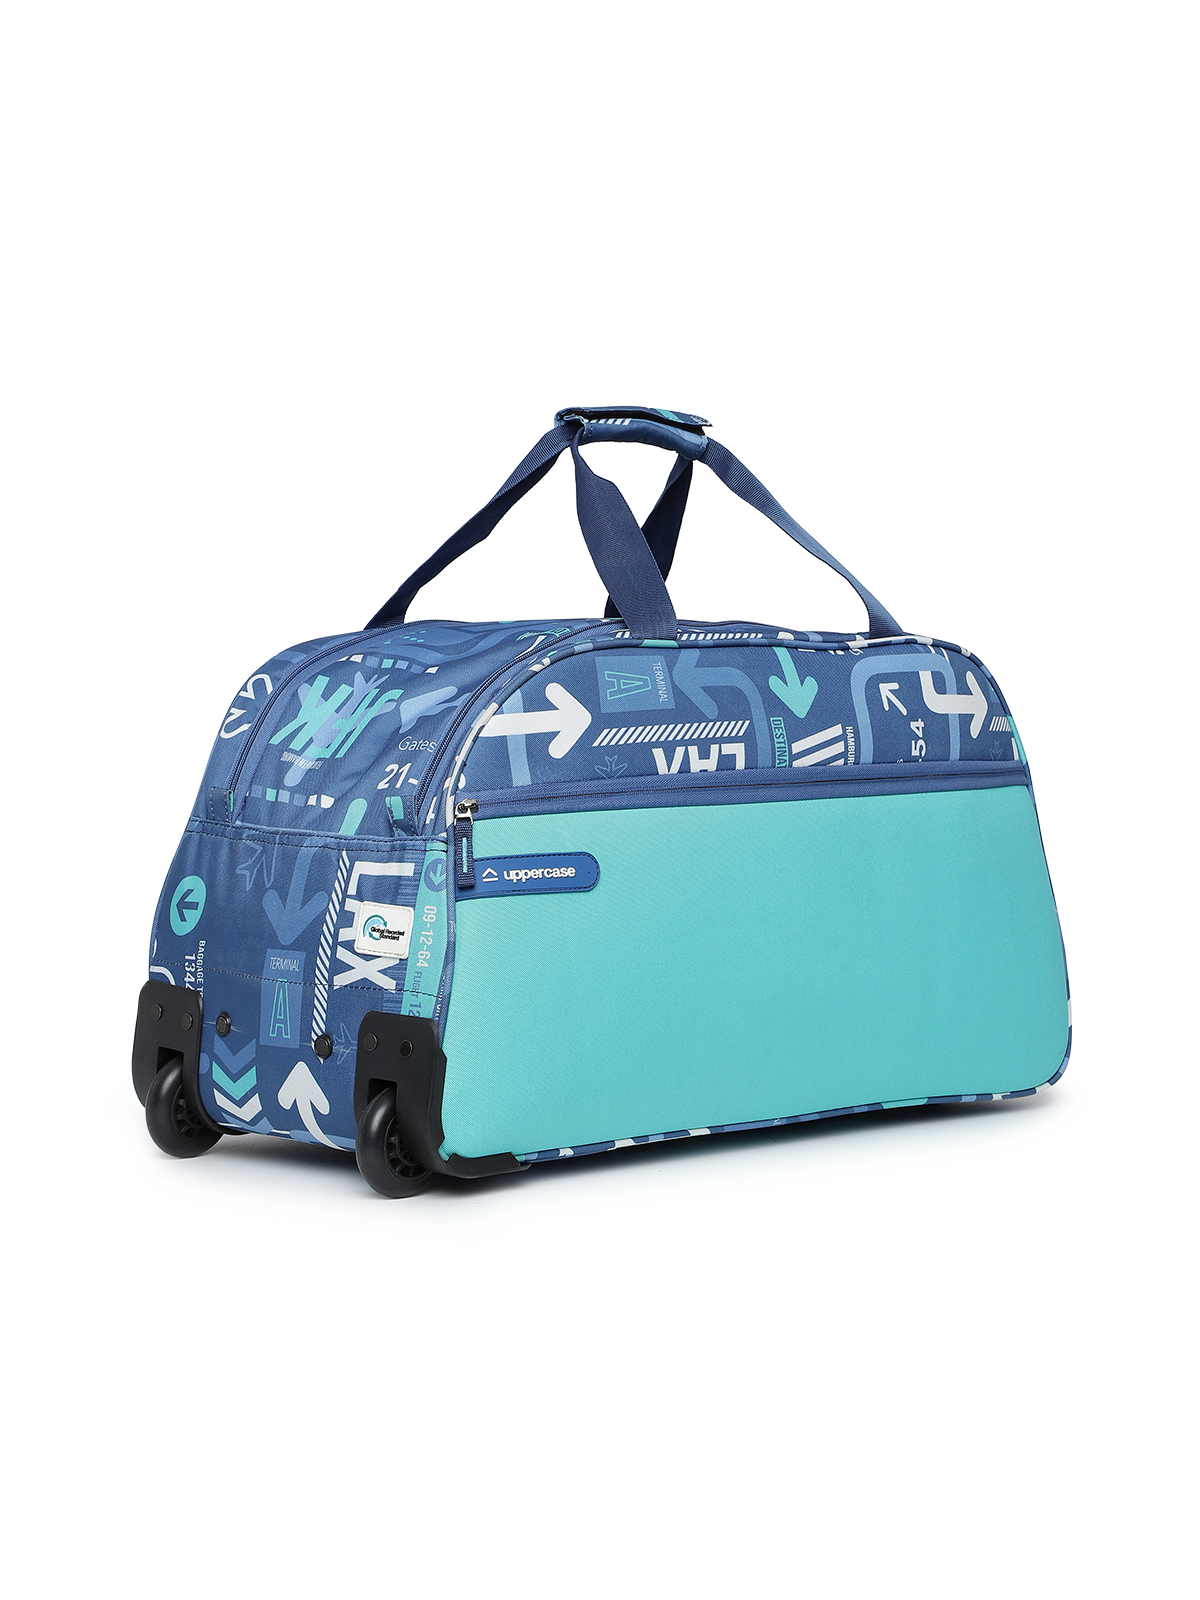 uppercase JFK 62 Duffle Trolley Bag | Dust Resistant Travel Bag | Spacious Main Compartment | Smooth Wheels | Quick Front Pocket Access | Duffle Bag for Women & Men | 1500 Days Warranty (Denim Blue)